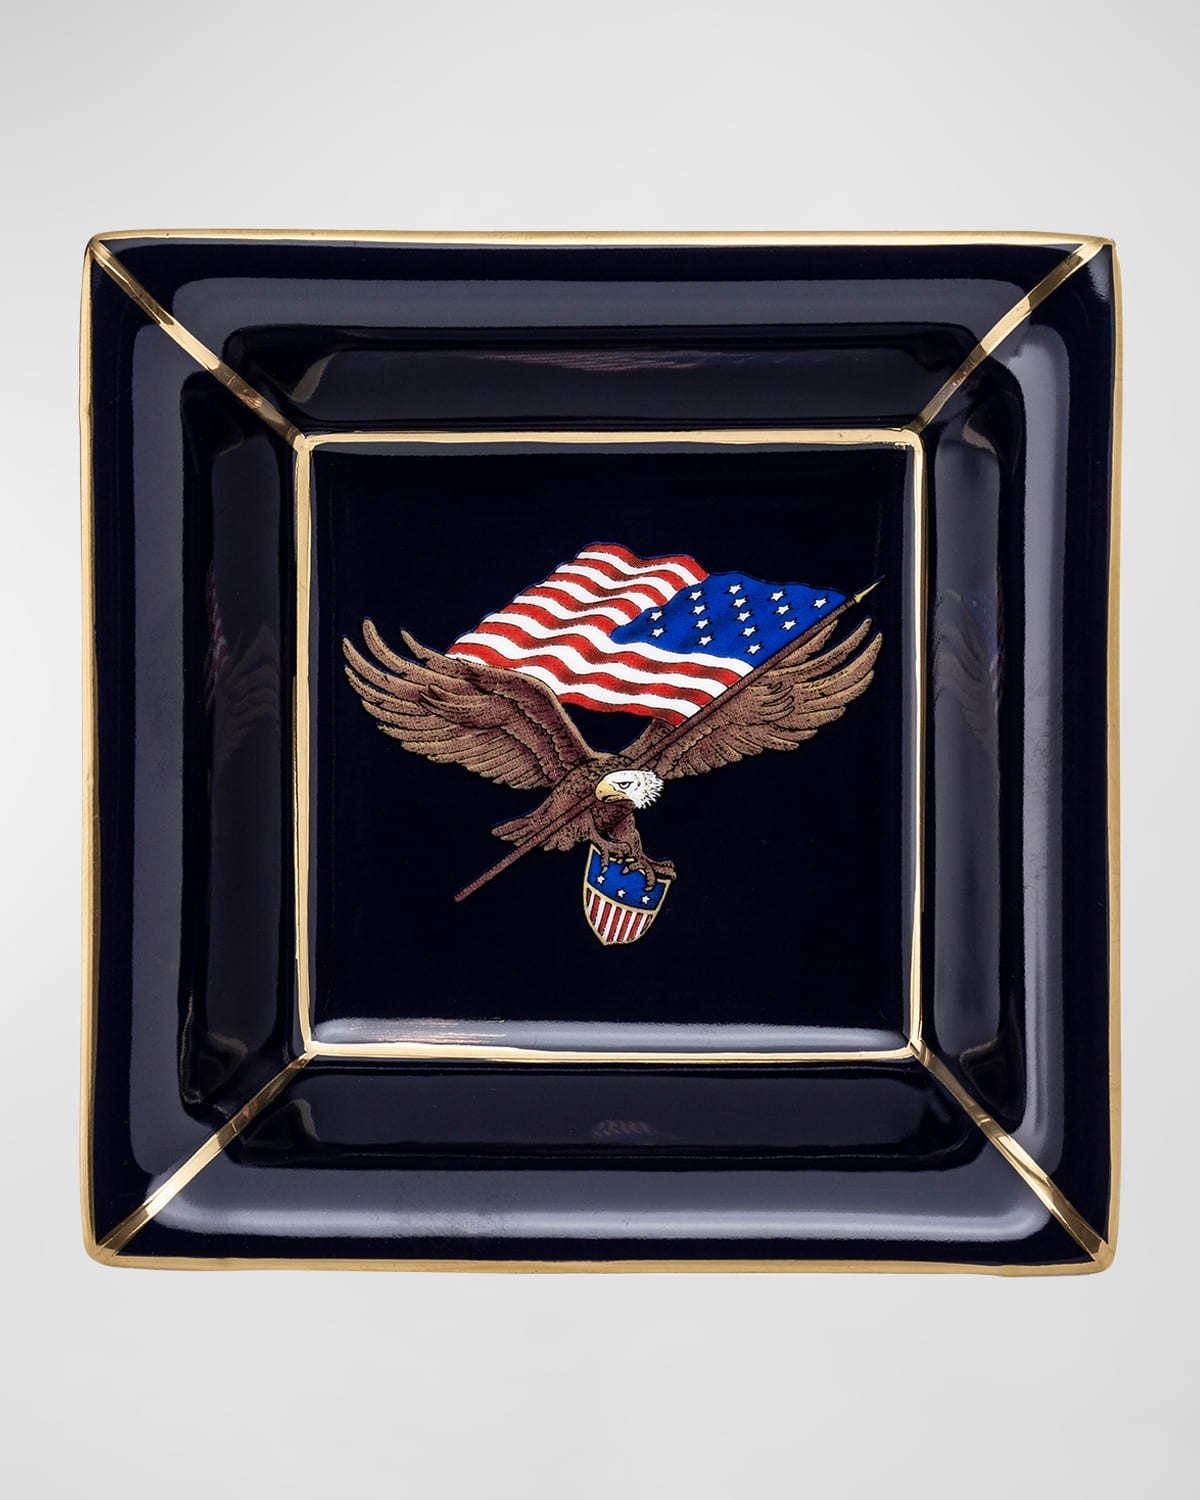 HALCYON DAYS STAR SPANGLED BANNER SQUARE TRAY